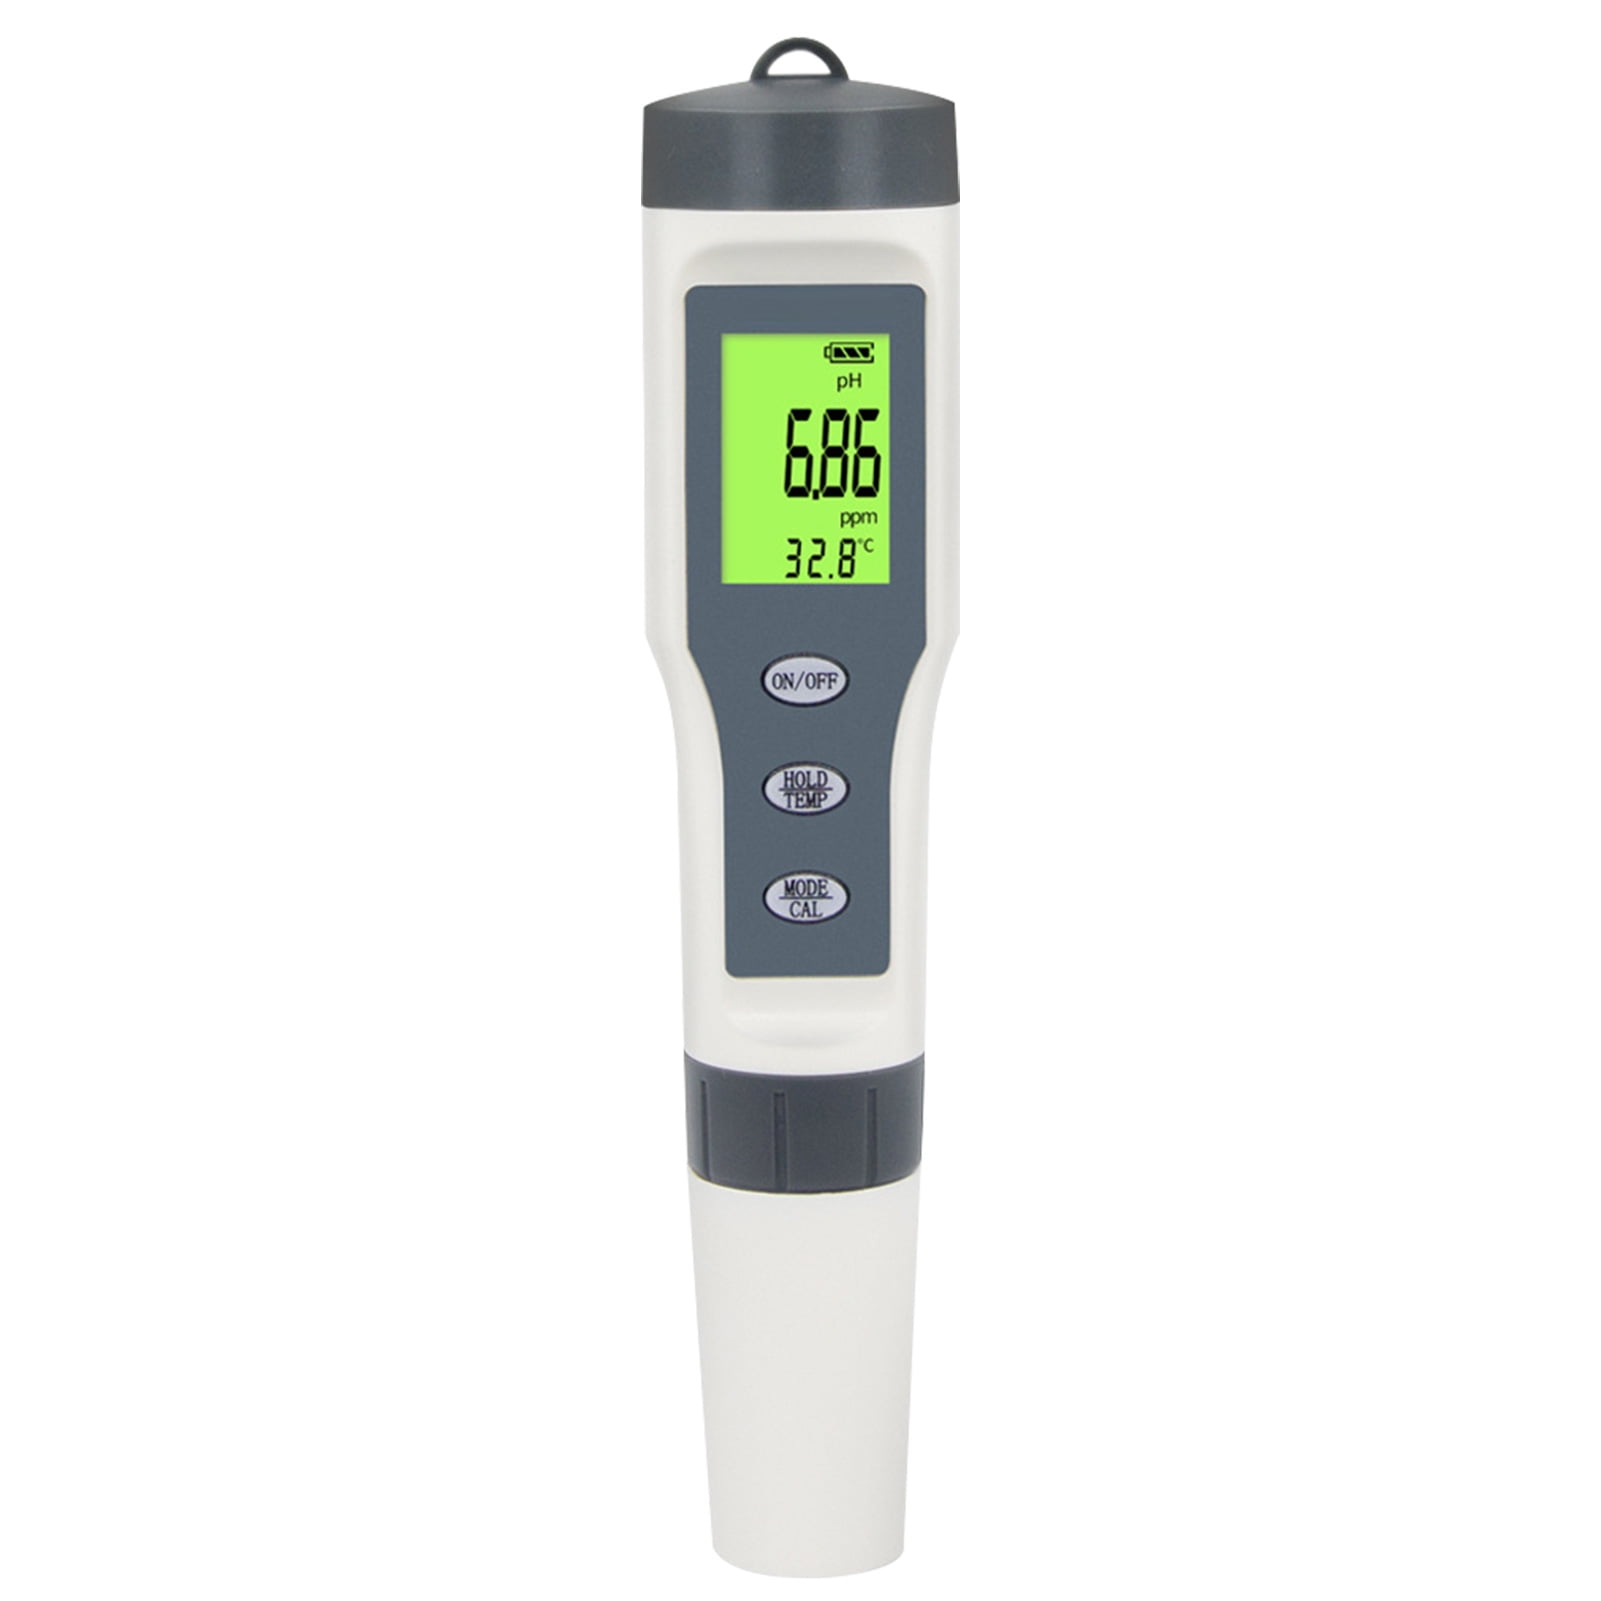 Details about   PH Meter Digital Tester Water Quality ATC Function LCD Display FREE SHIPPING 